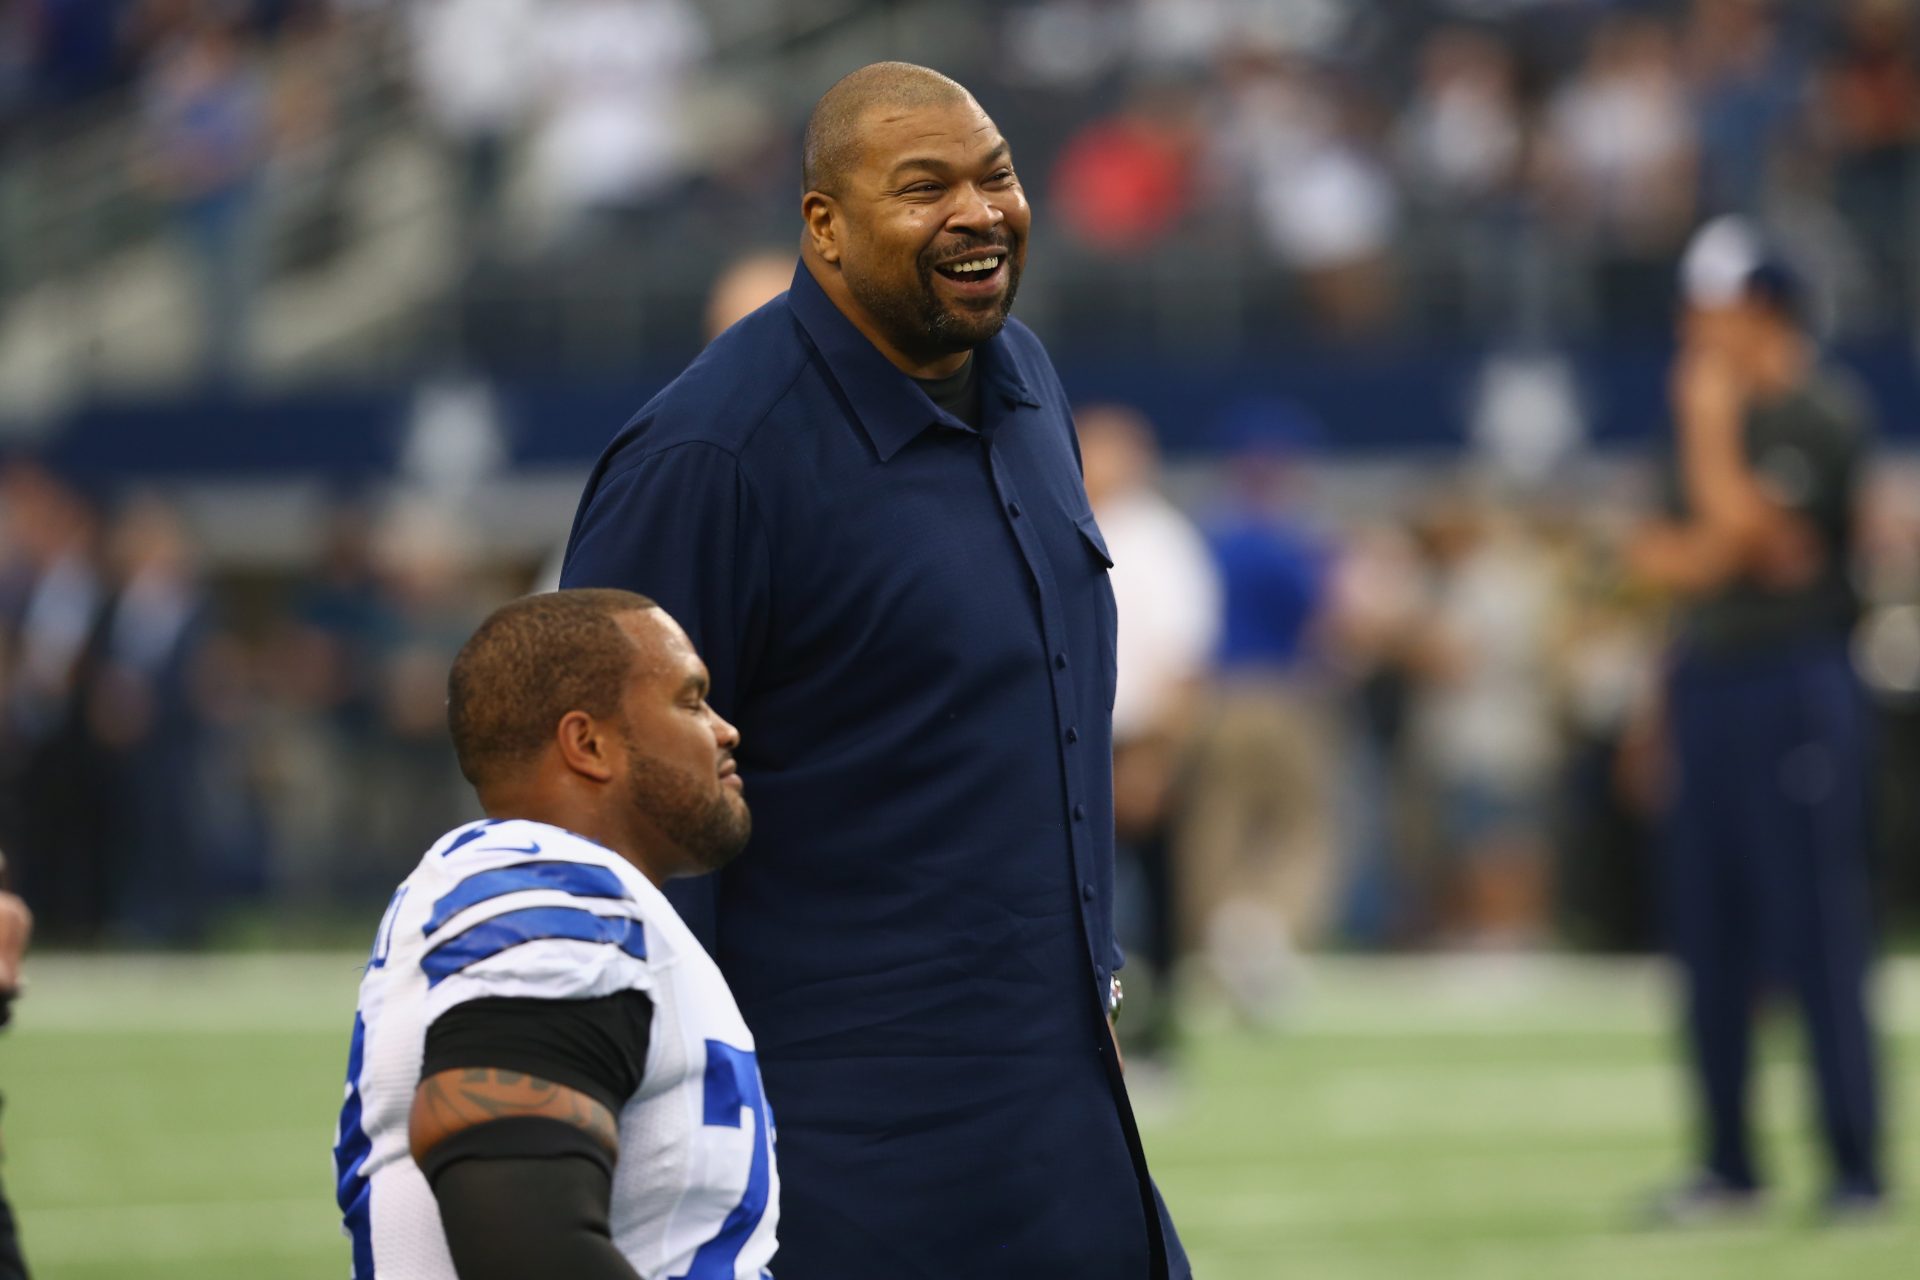 Tributes pour in for NFL Great Larry Allen after he unexpectedly passed away